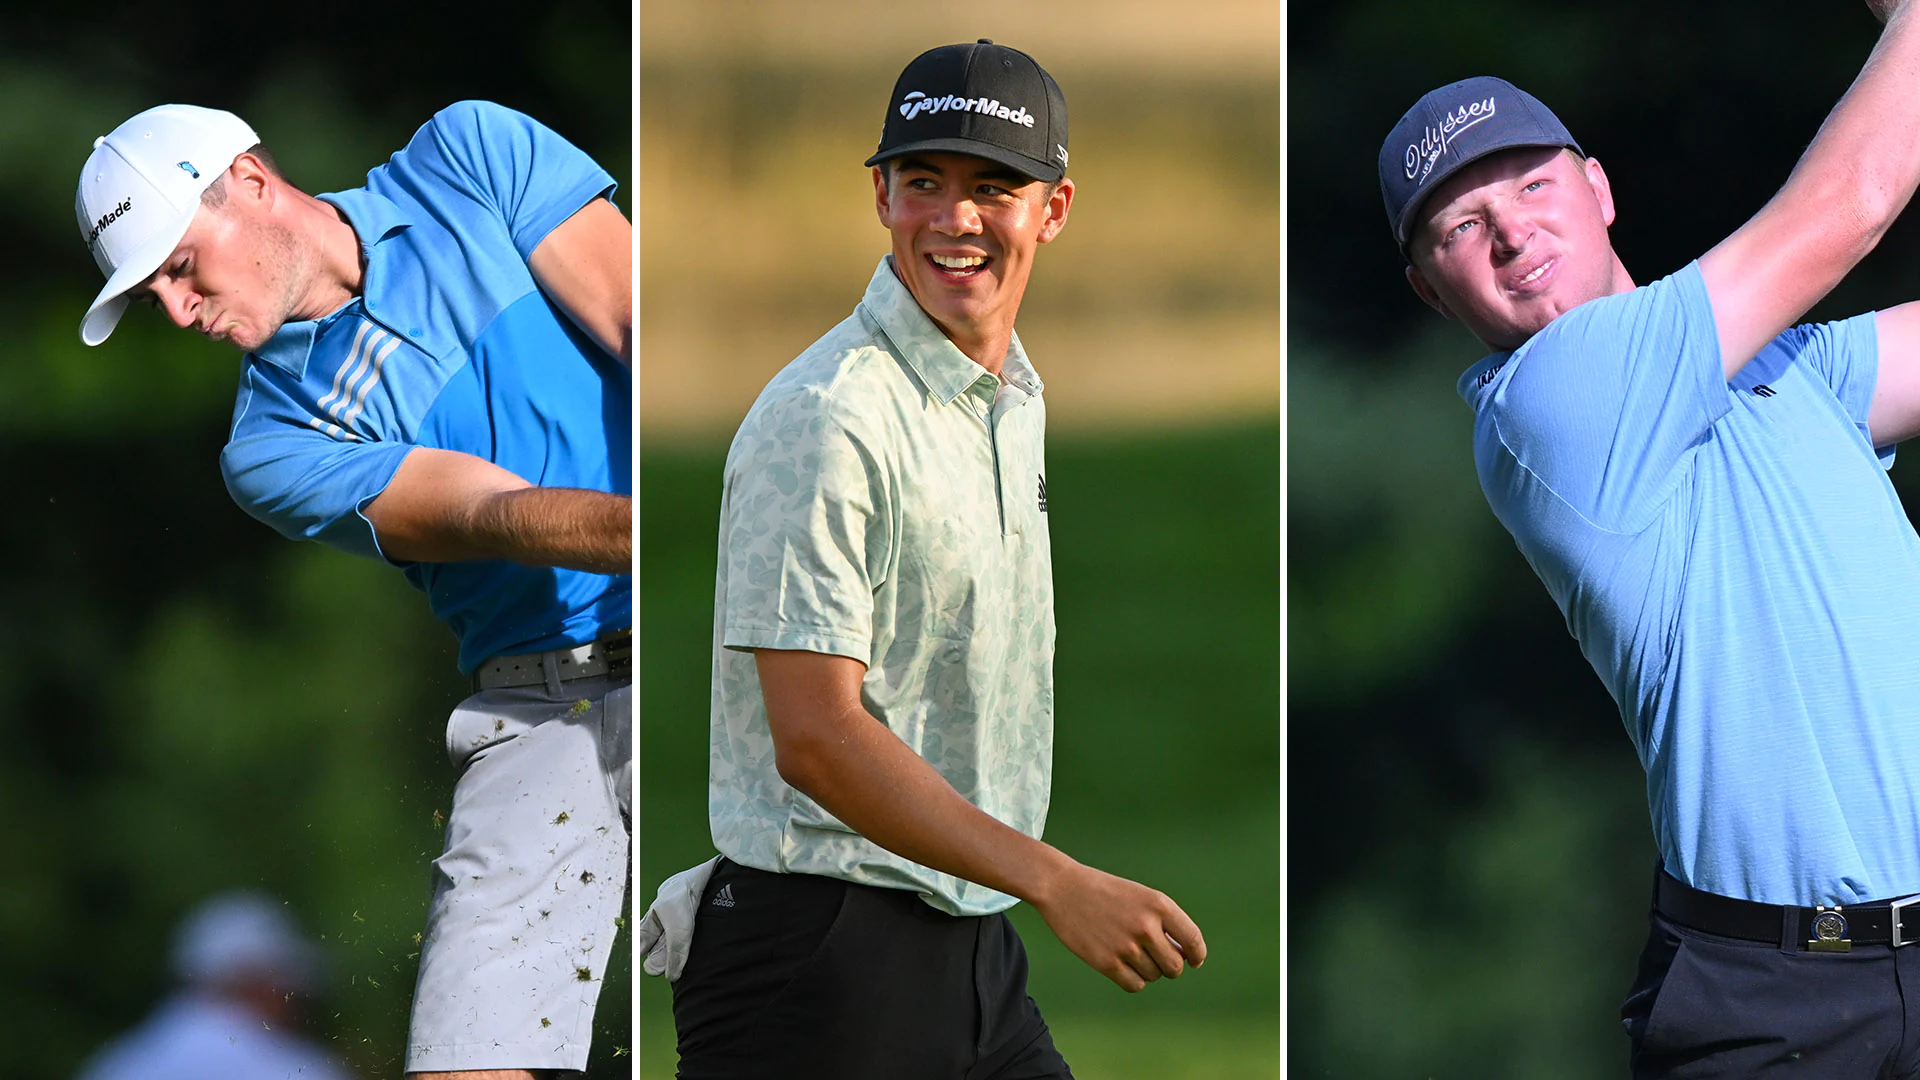 U.S. Amateur stroke play wraps up: Tree trouble, high scores and four co-medalists